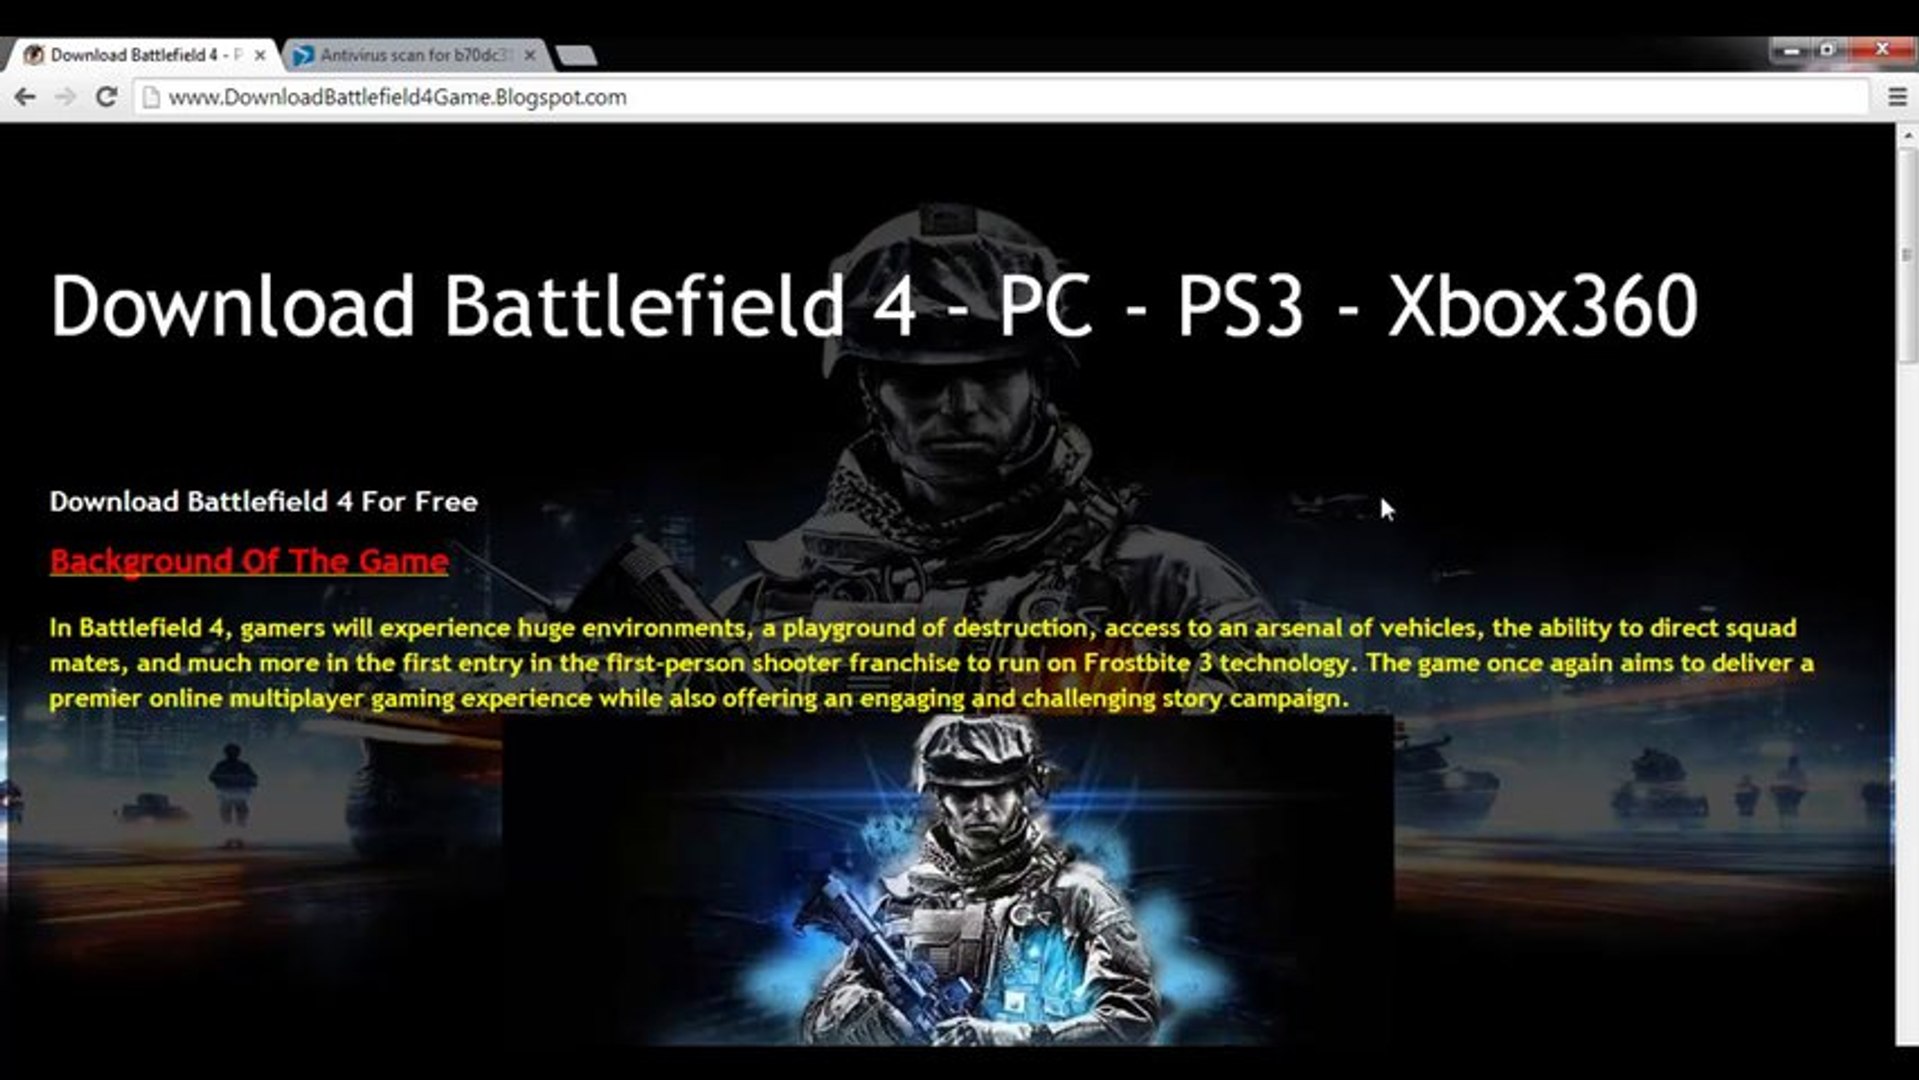 How to Download Battlefield 4 Game Code Generator Free - Xbox 360